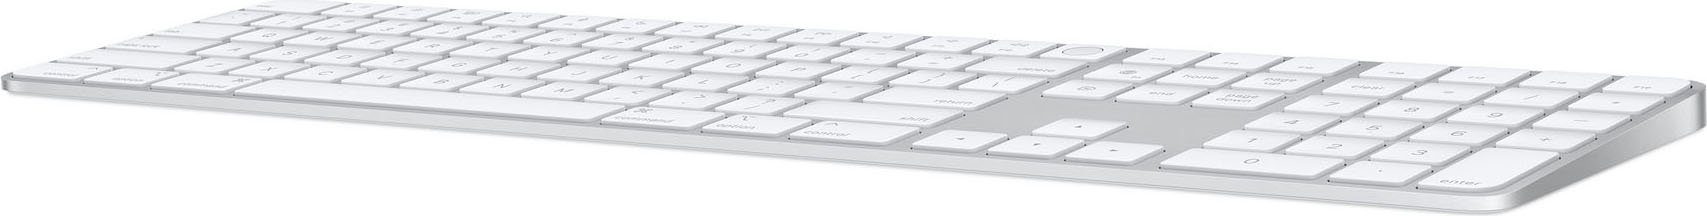 with Mac Numeric Touch Apple-Tastatur Apple ID and Keypad Magic Keyboard for